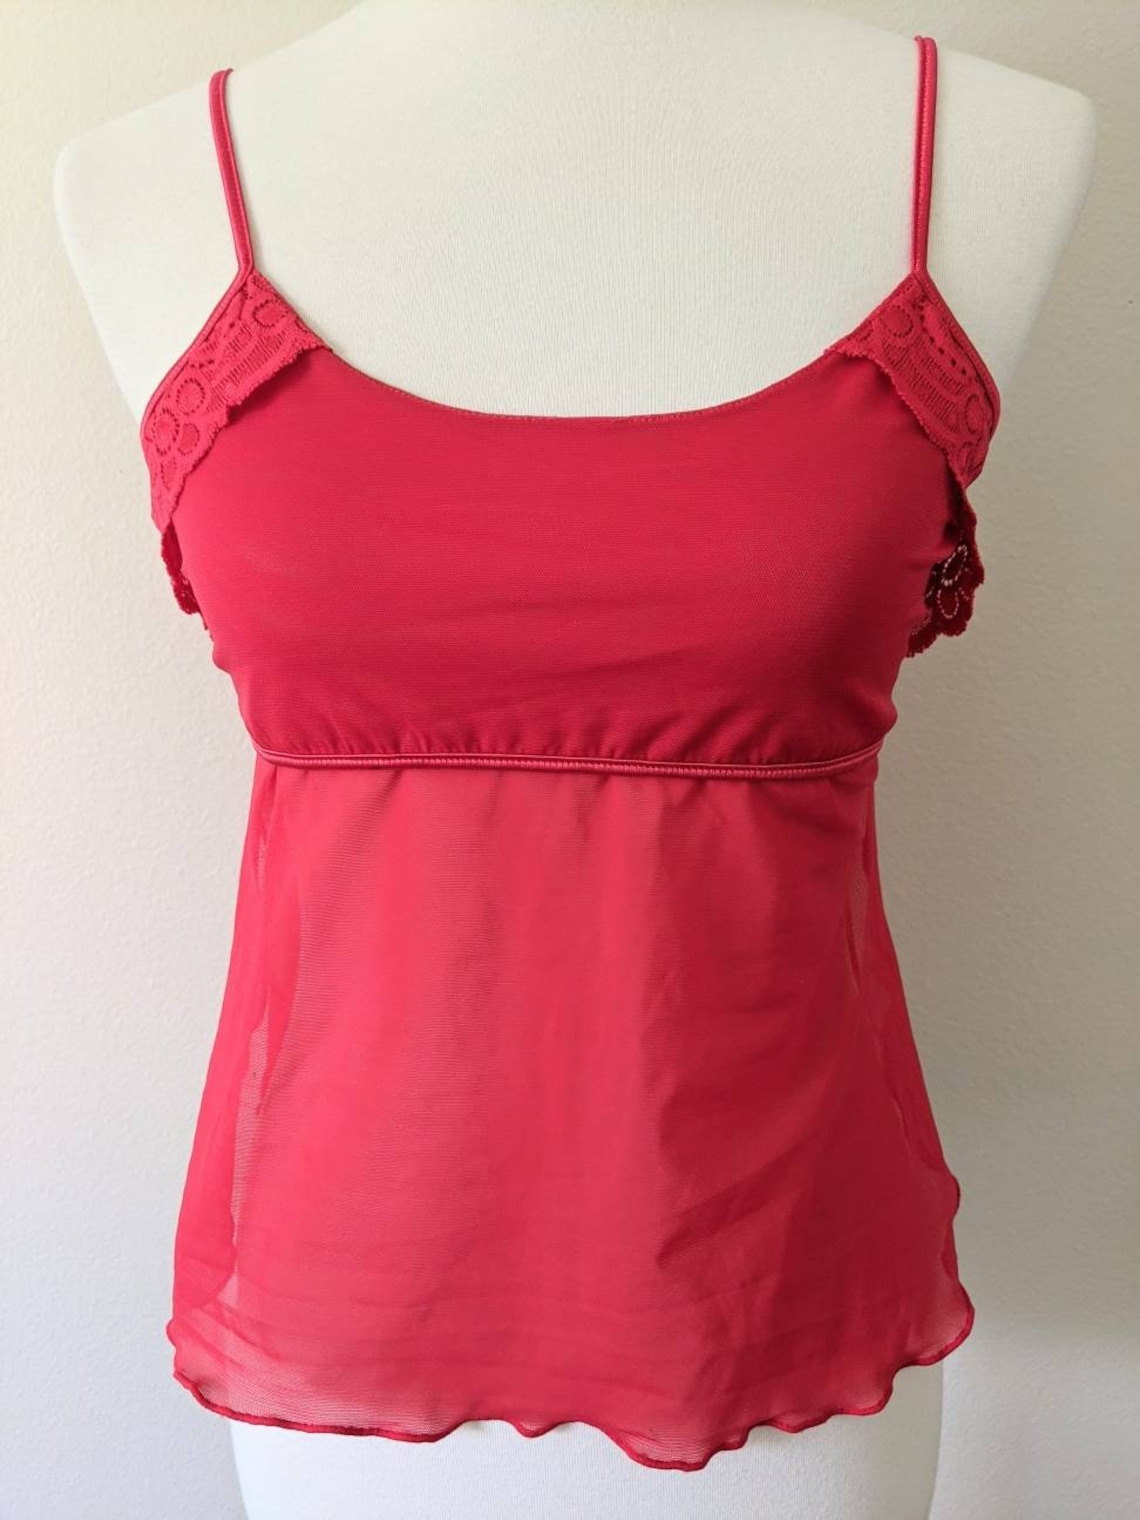 Y2K Camisole Red Sheer See Through Lingerie Sexy Top Pajama | Etsy